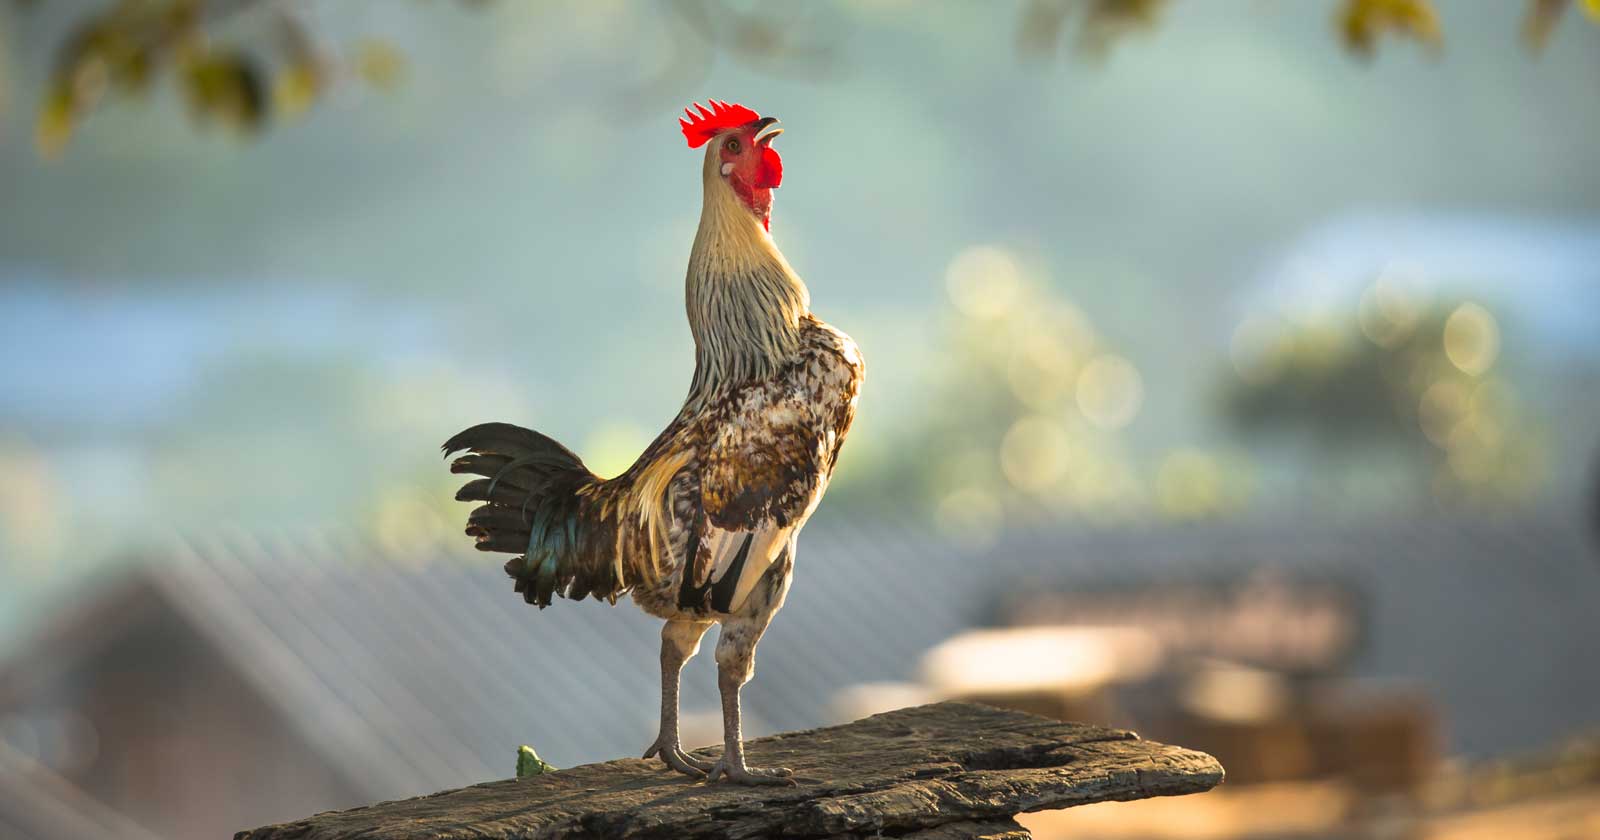 Image of a rooster crowing